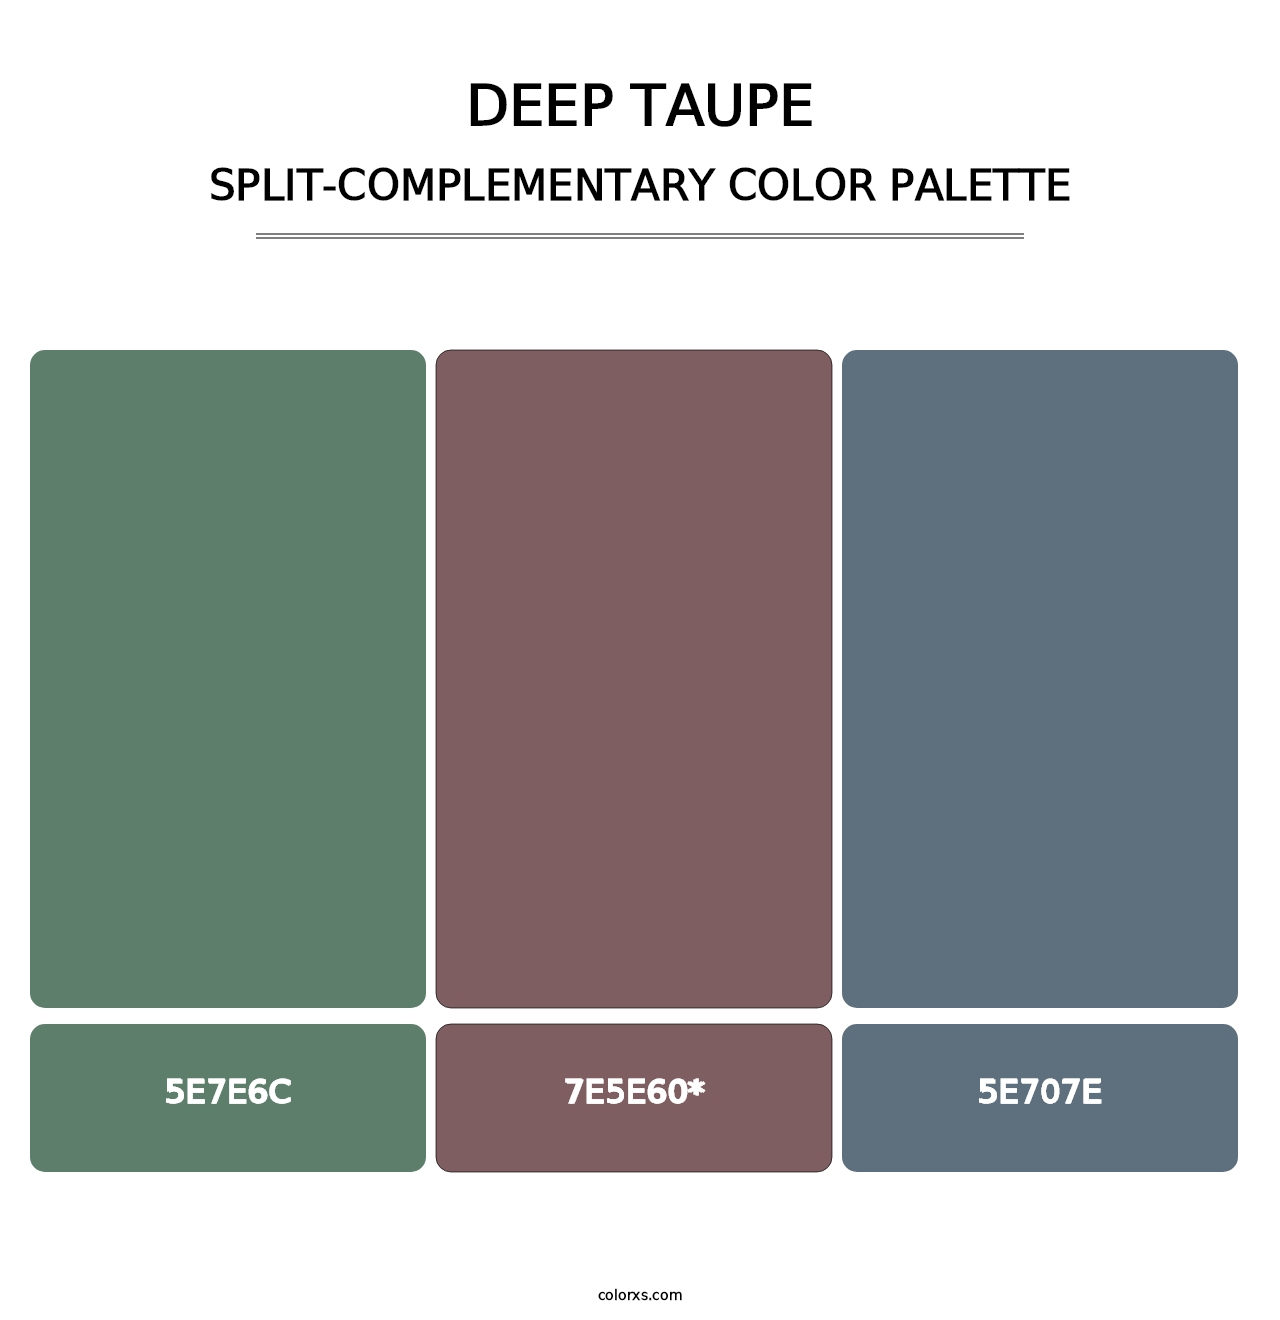 Deep Taupe - Split-Complementary Color Palette